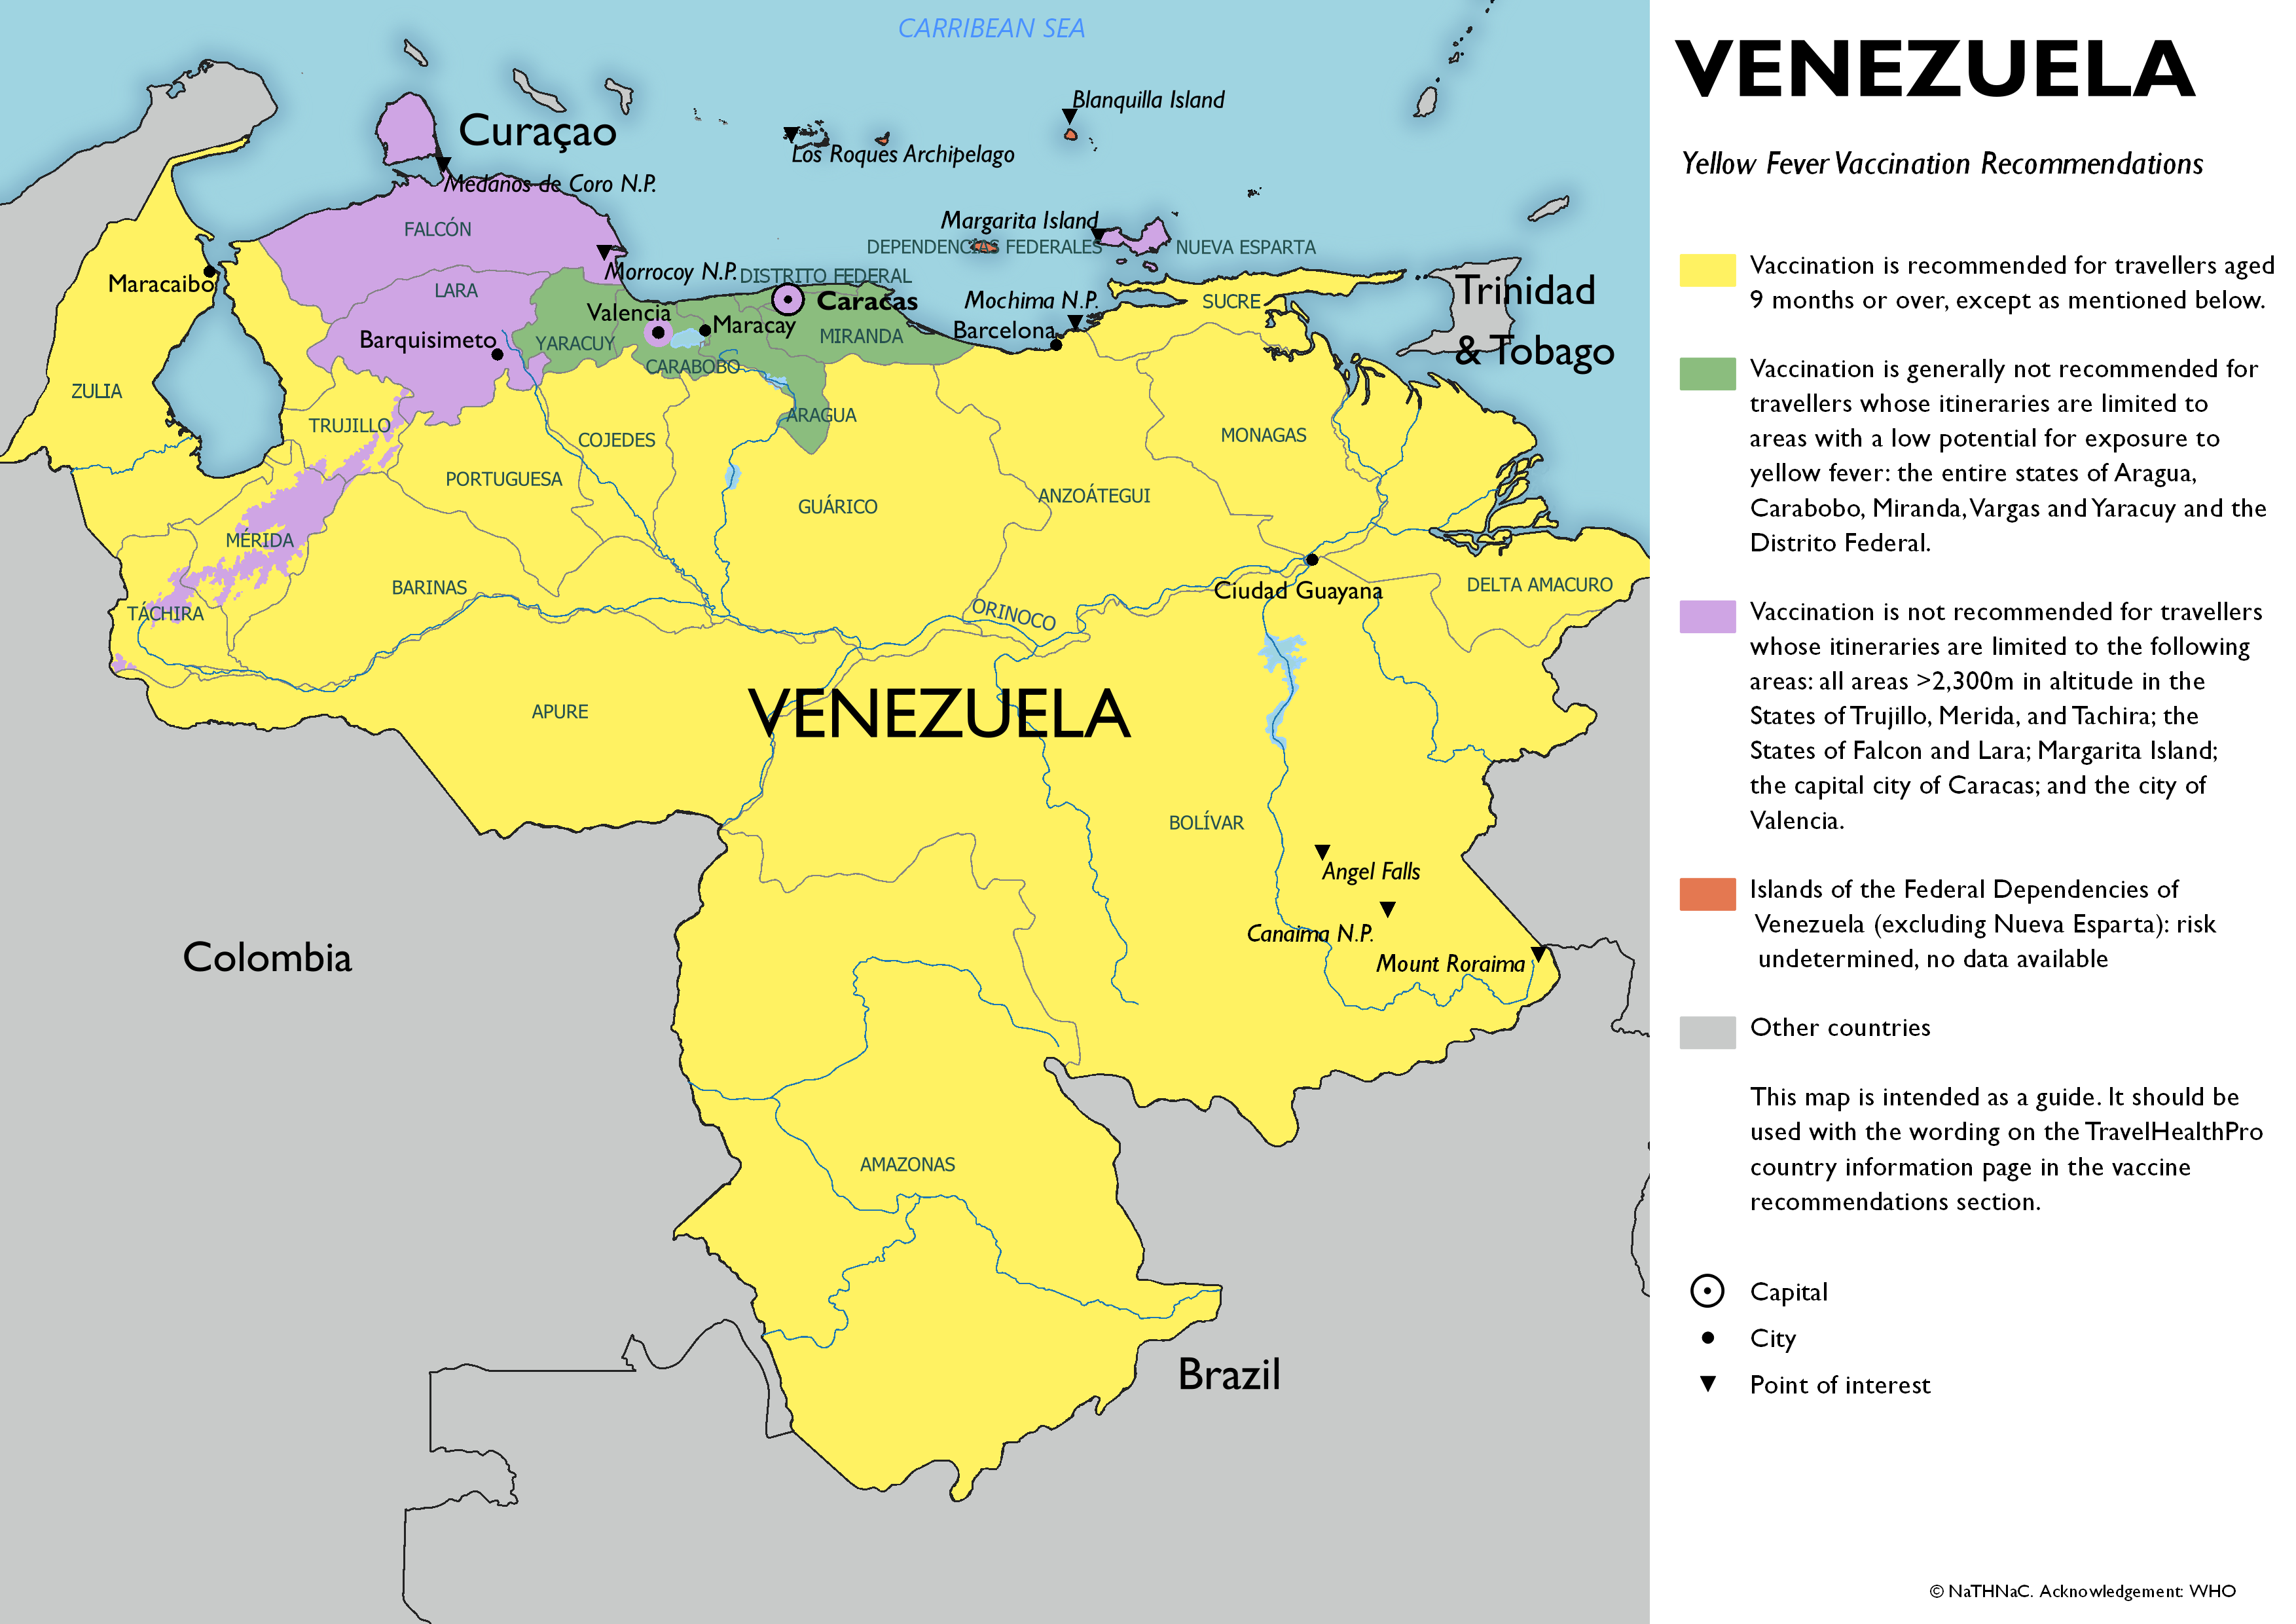 Yellow fever vaccine recommendation map for Venezuela